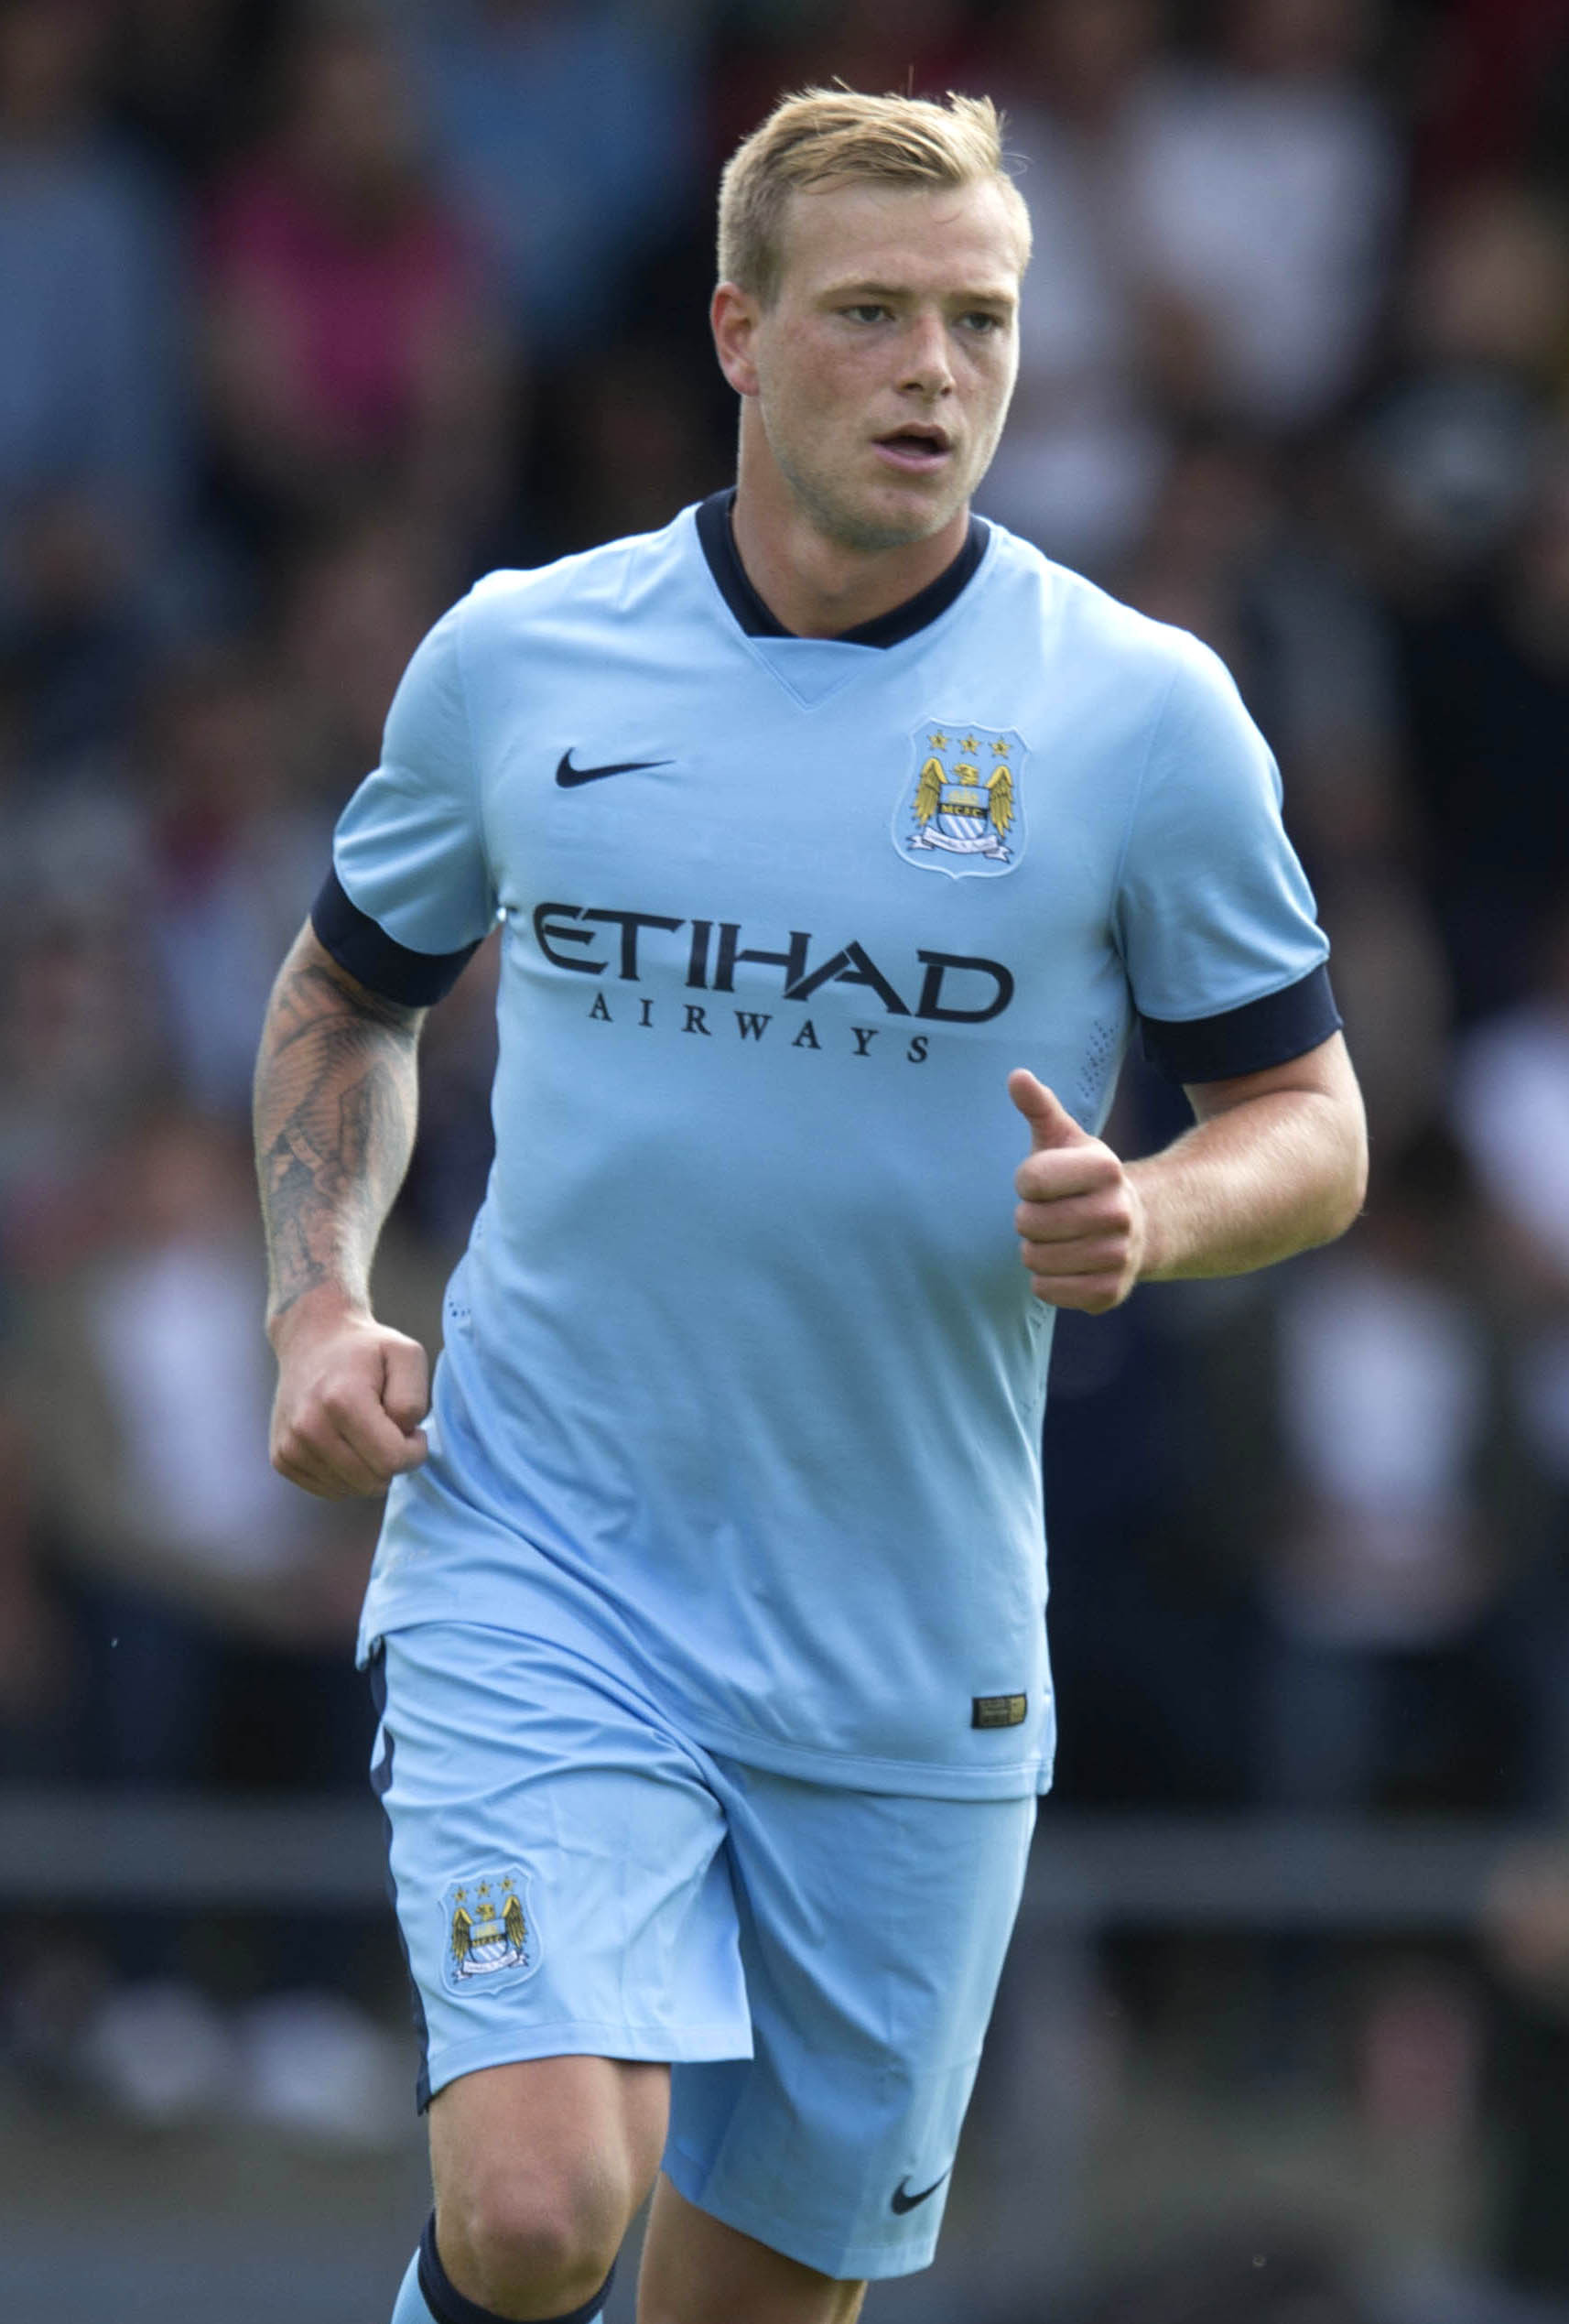 Guidetti played for Manchester City from 2010-2015